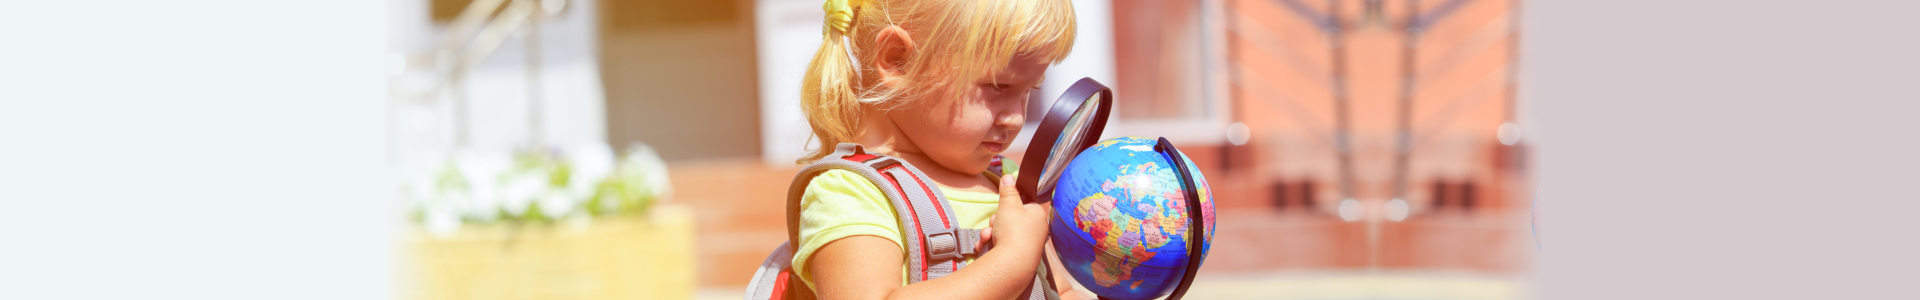 beautiful little girl holding a magnifying glass and a globe